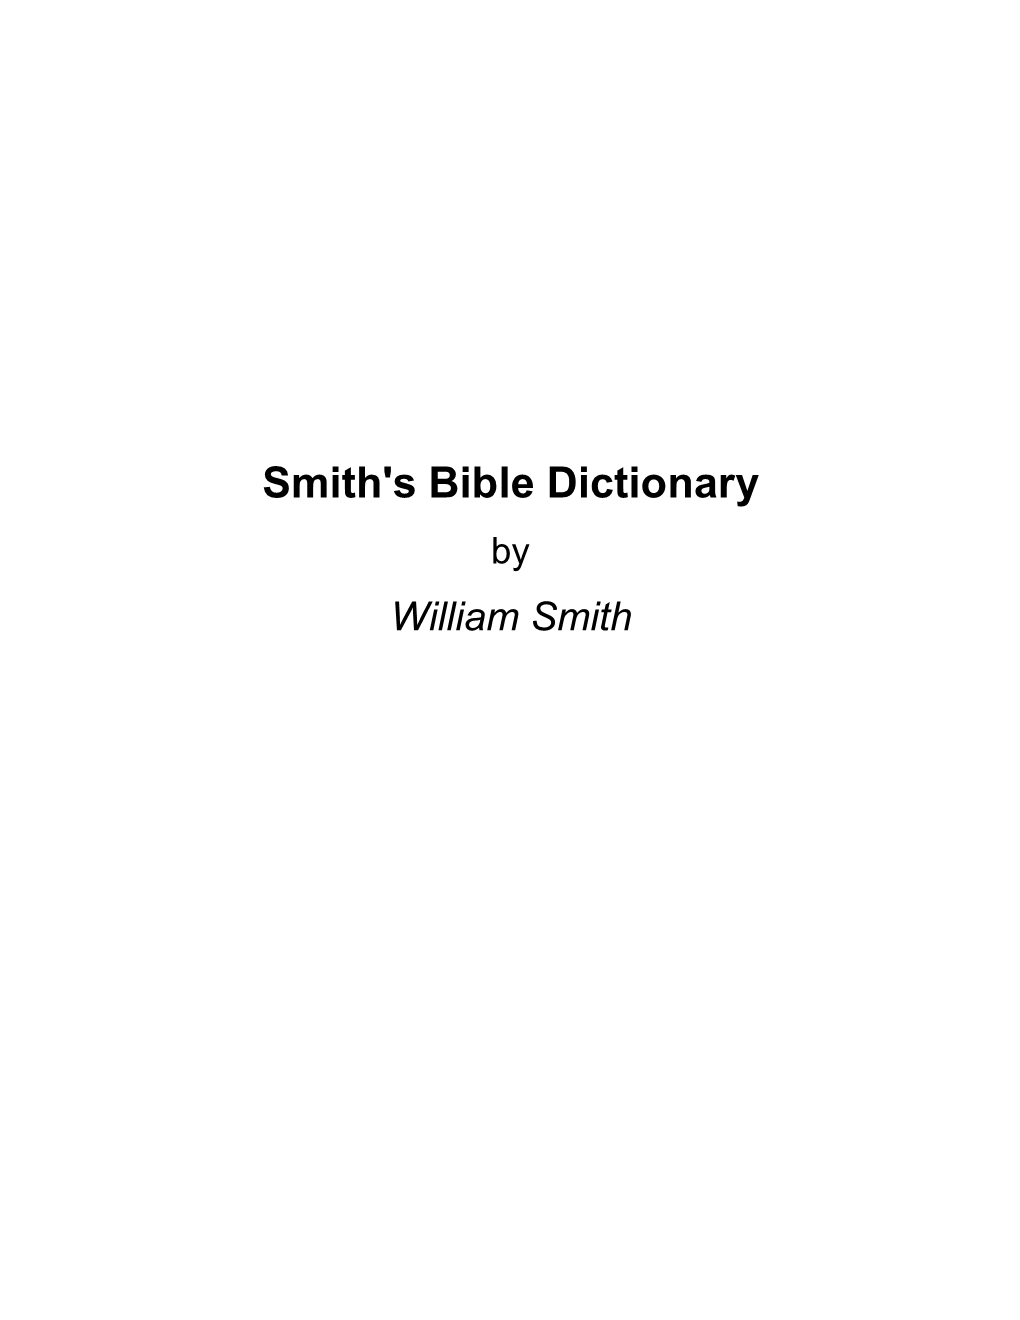 Smith's Bible Dictionary by William Smith